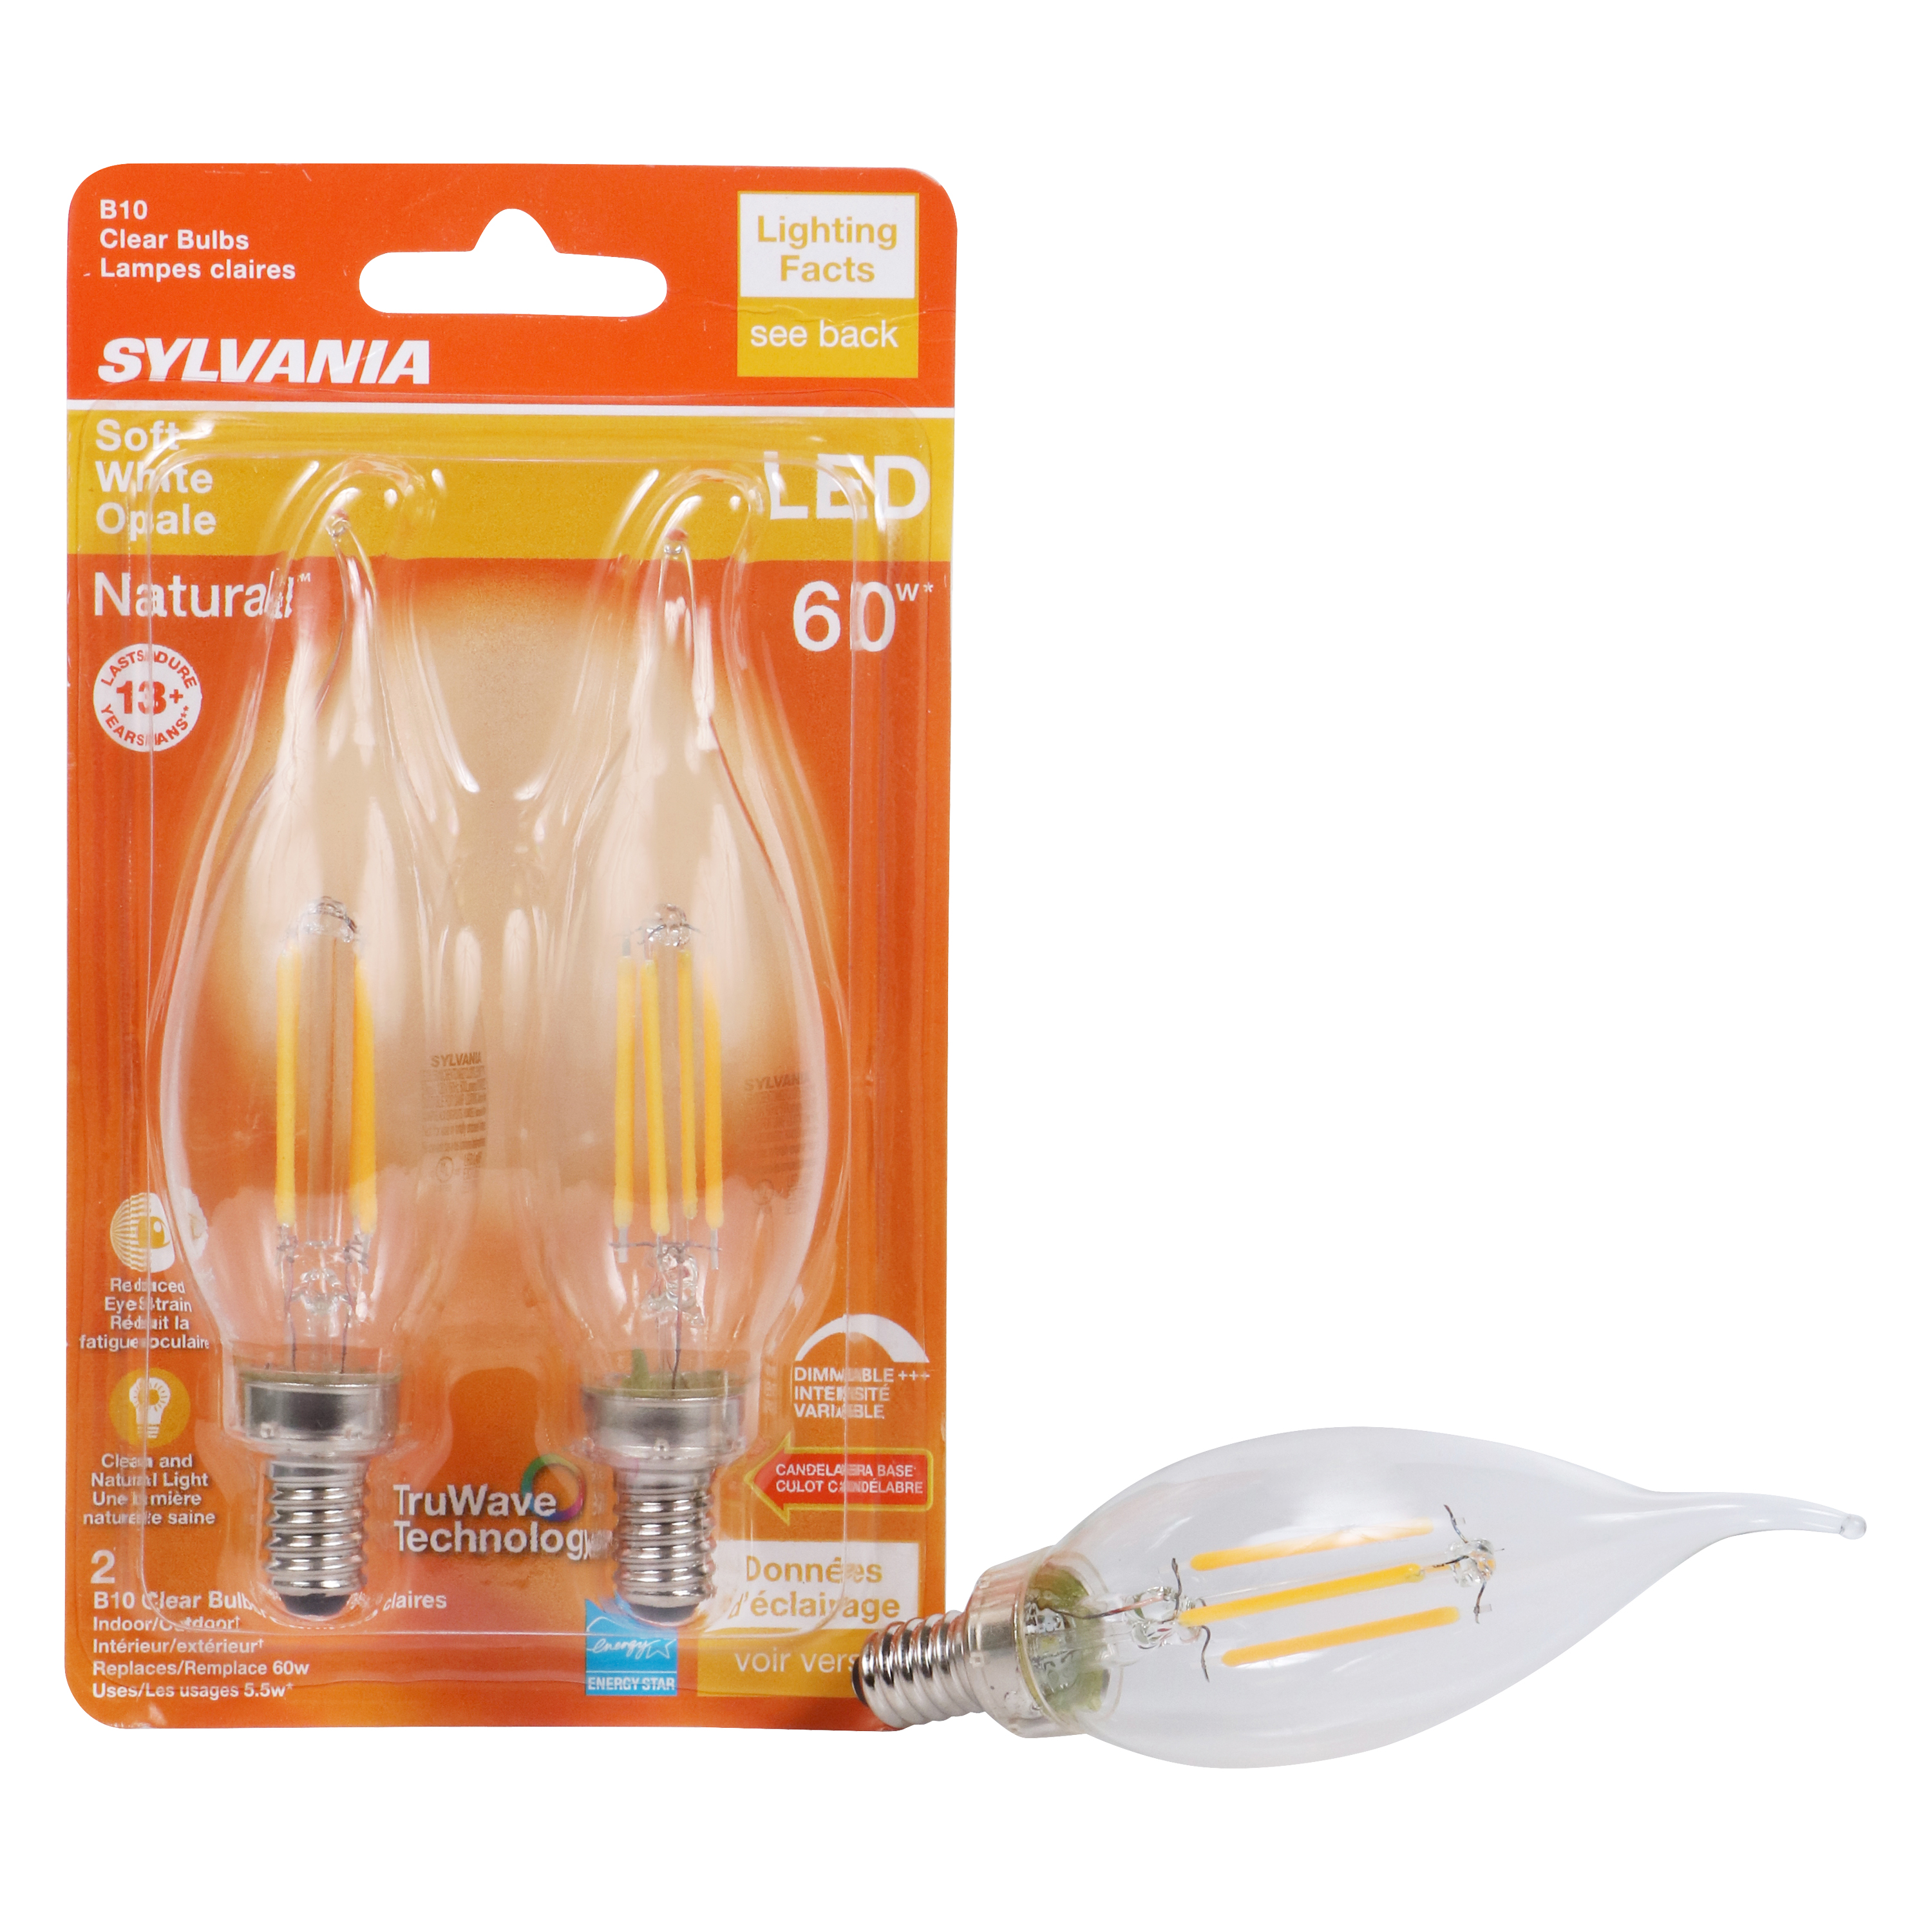 Sylvania 40757 Natural LED Bulb, Decorative, B10 Bent Tip Lamp, 60 W Equivalent, E12 Lamp Base, Dimmable, Clear